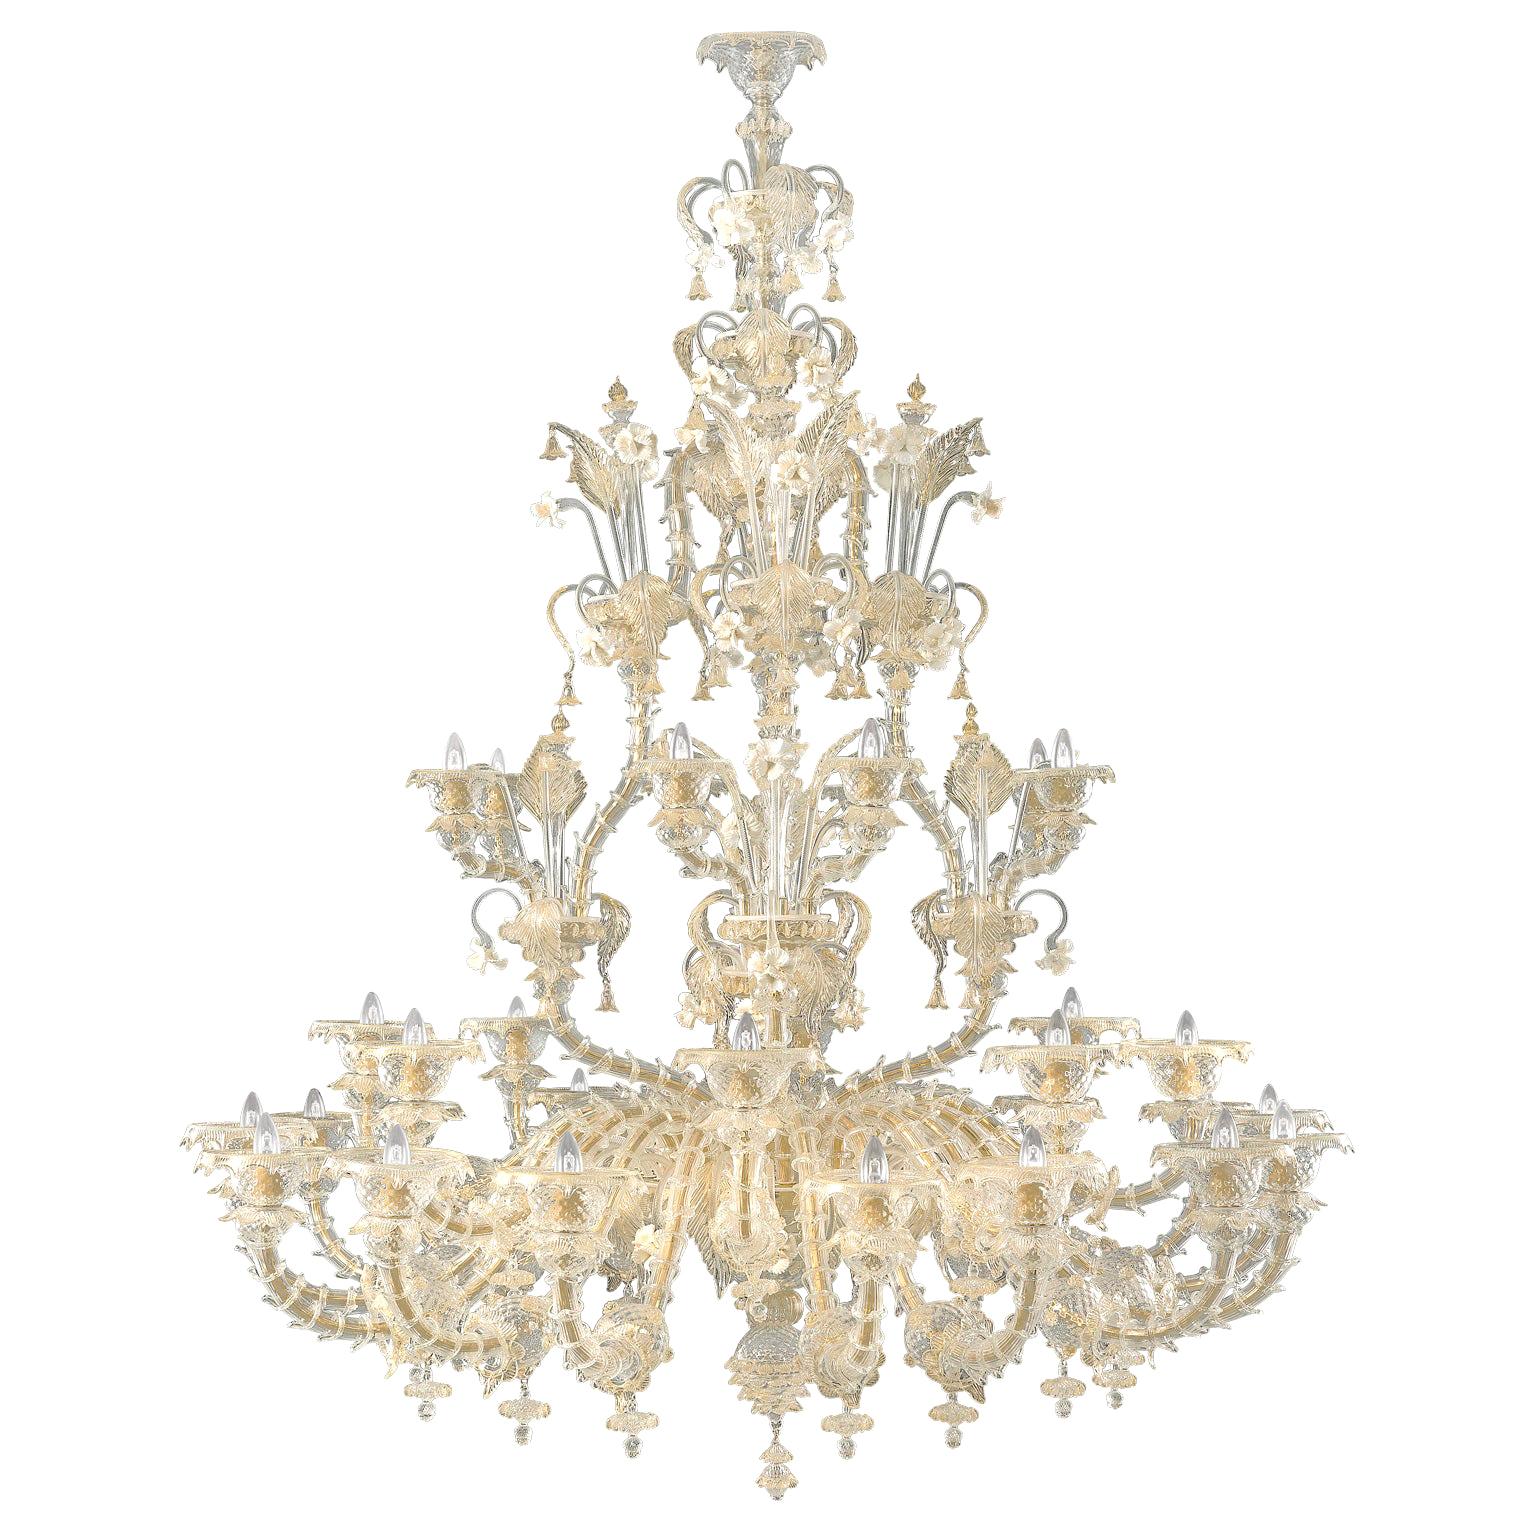 Artistic Chandelier 16+8+8 arms Crystal Murano Glass gold details by Multiforme